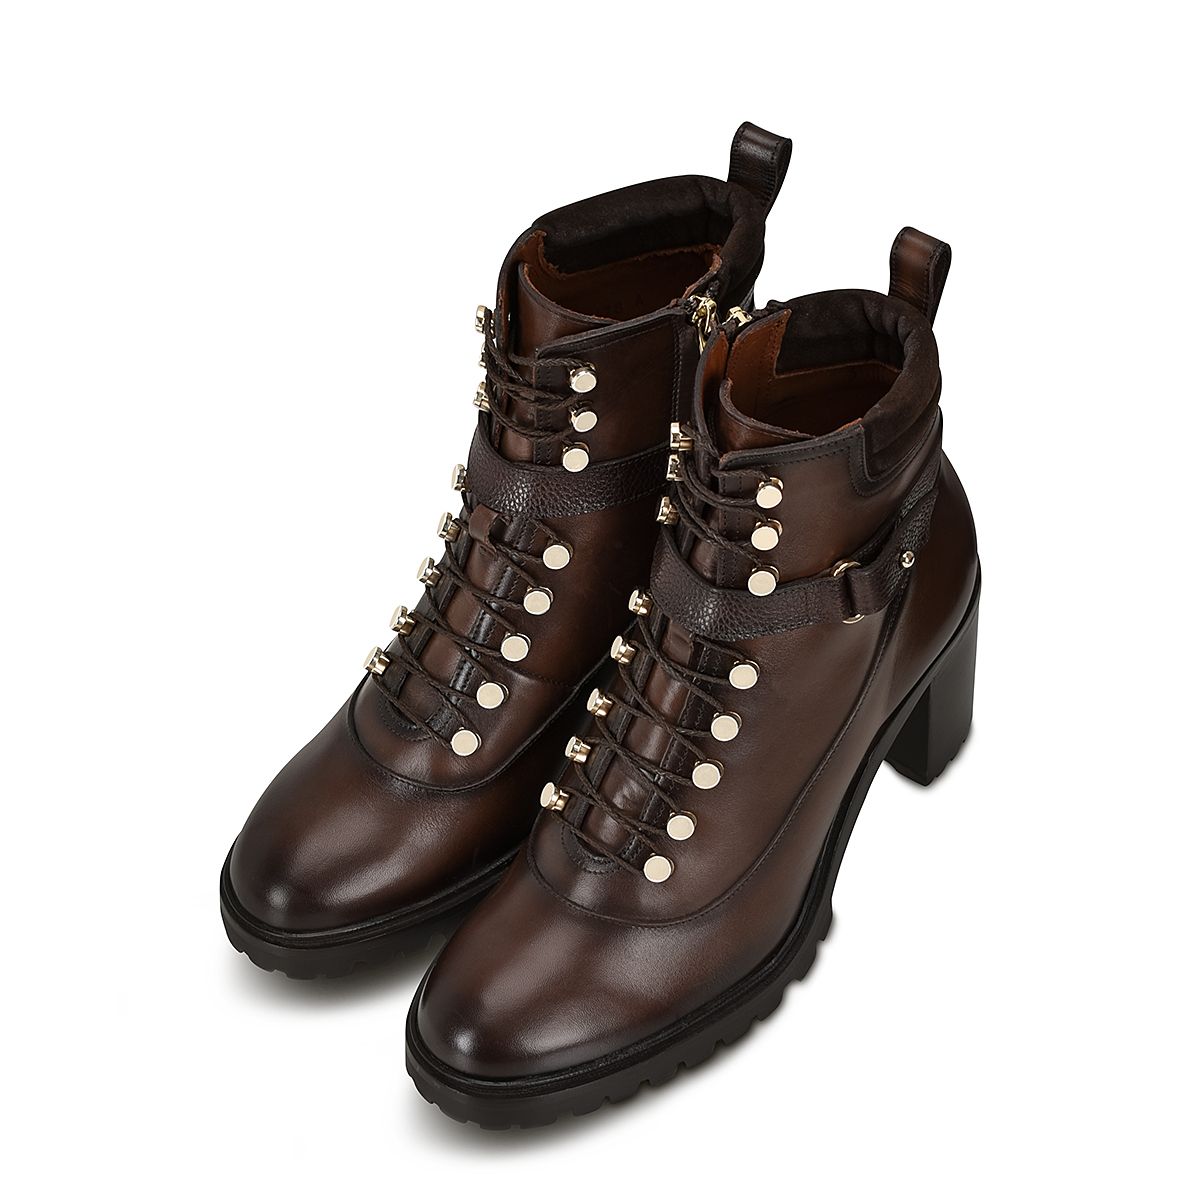 K33TSRS - Franco Cuadra brown casual fashion leather ankle boots for women-Kuet.us